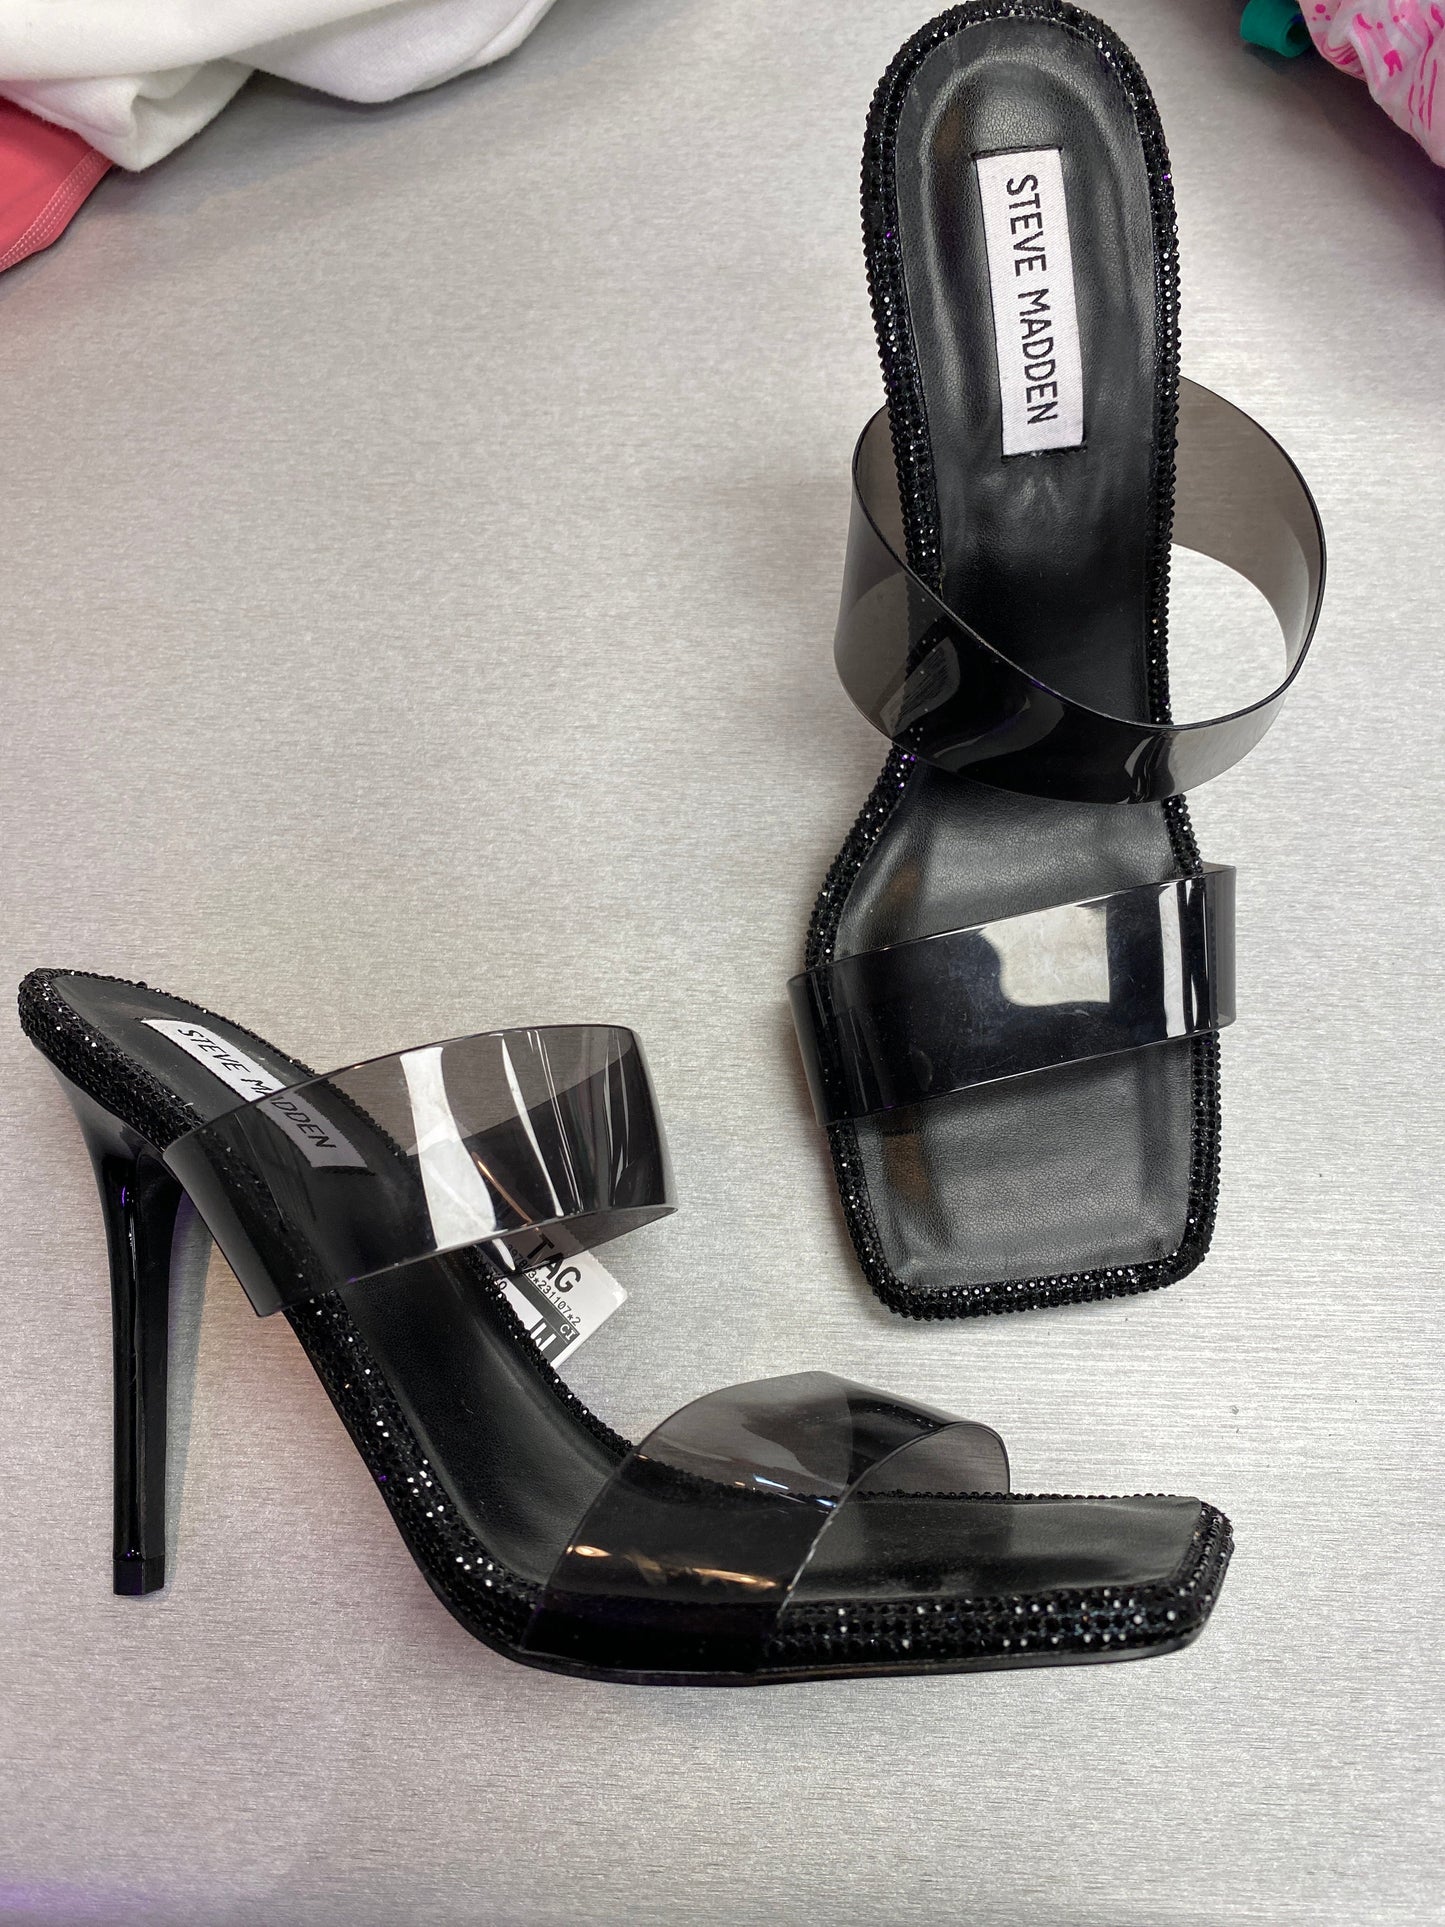 Shoes Heels Stiletto By Steve Madden  Size: 10